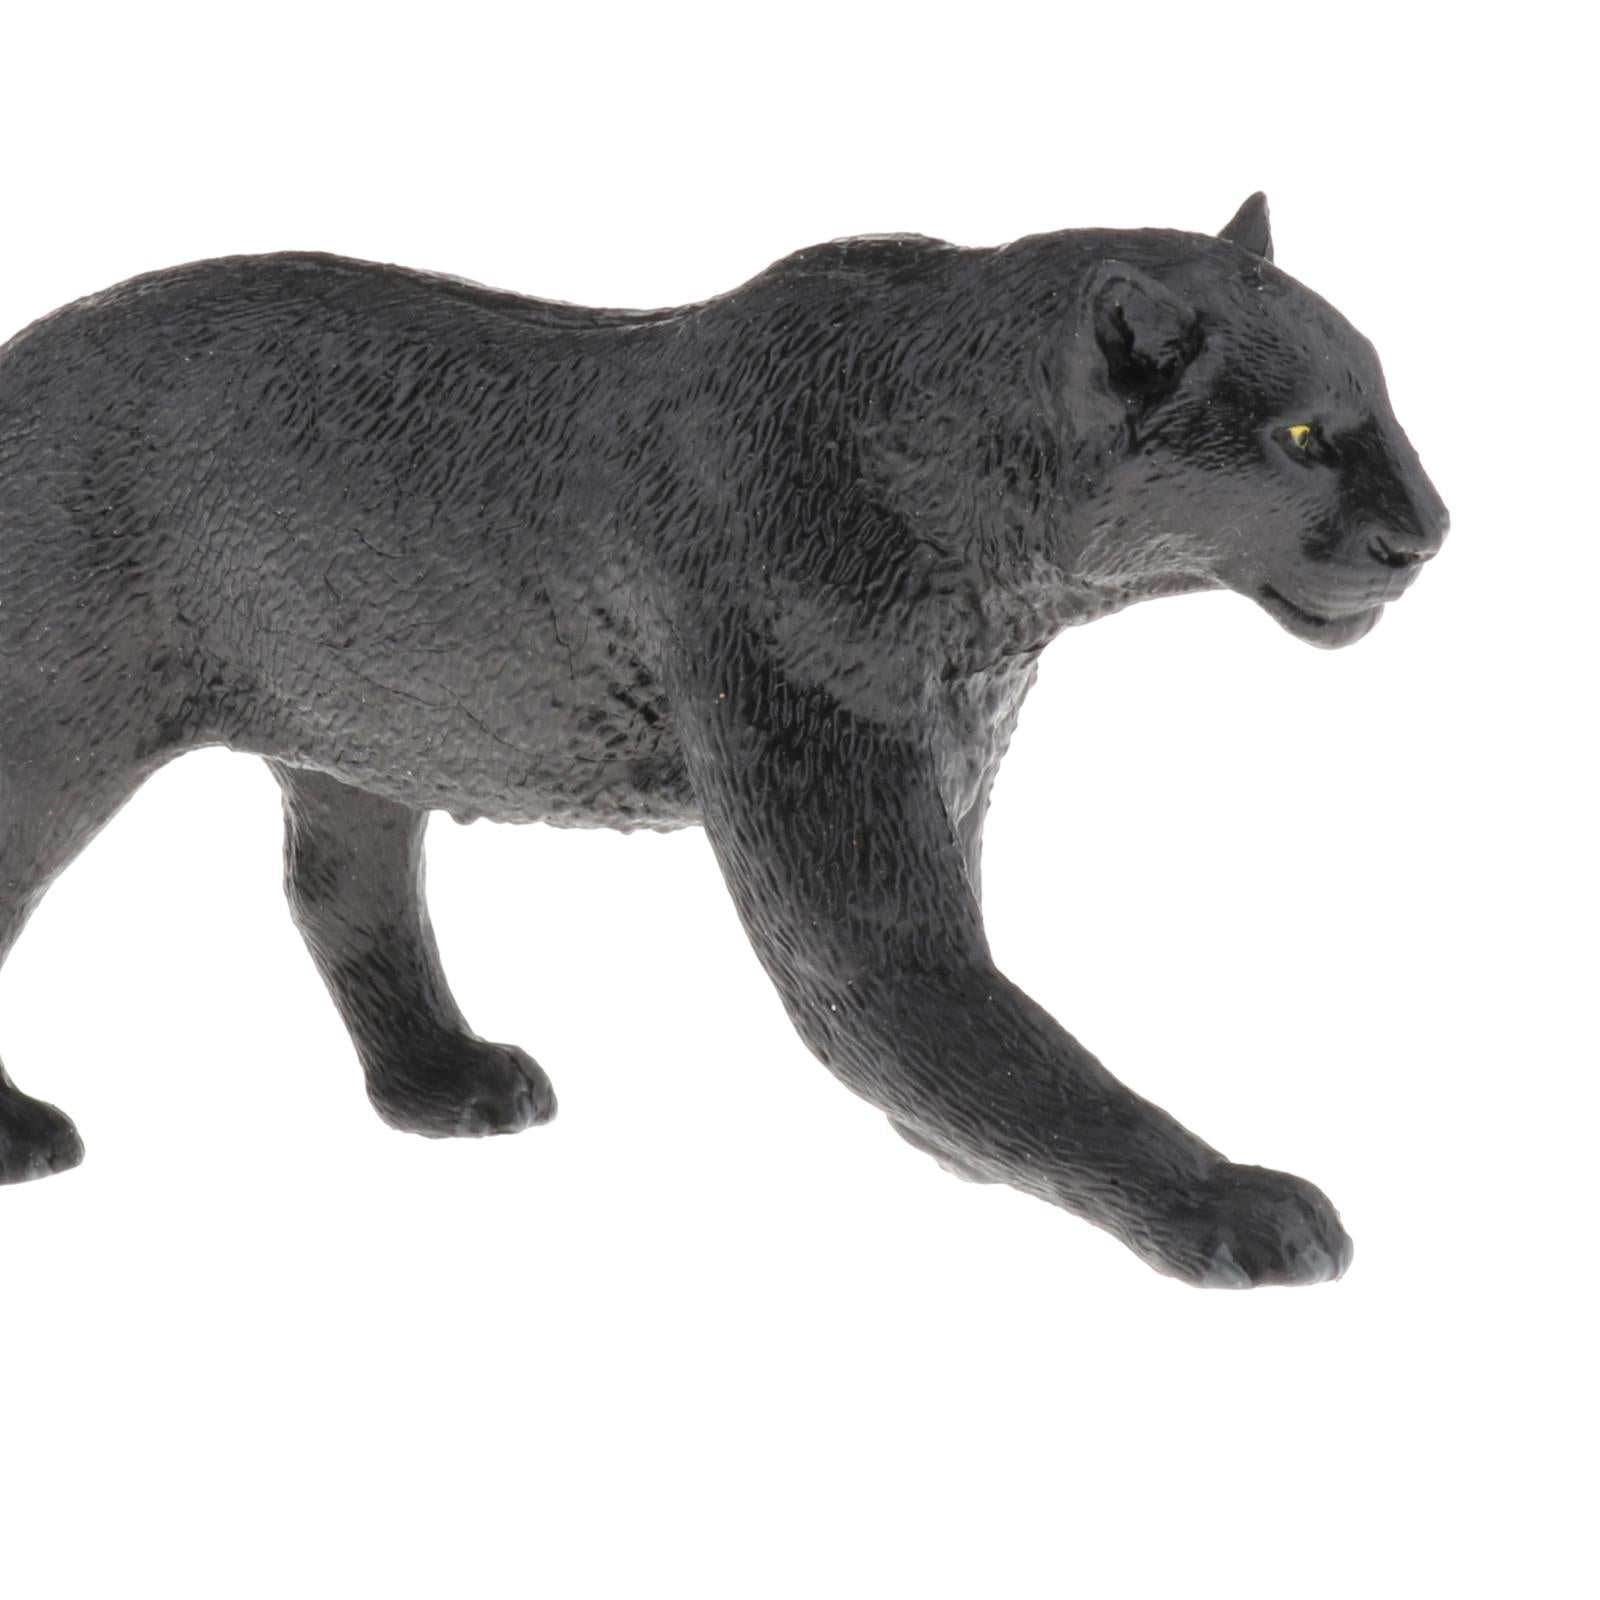 Simulation Animal Figures Model Kids Educational Toys Gifts  Panther